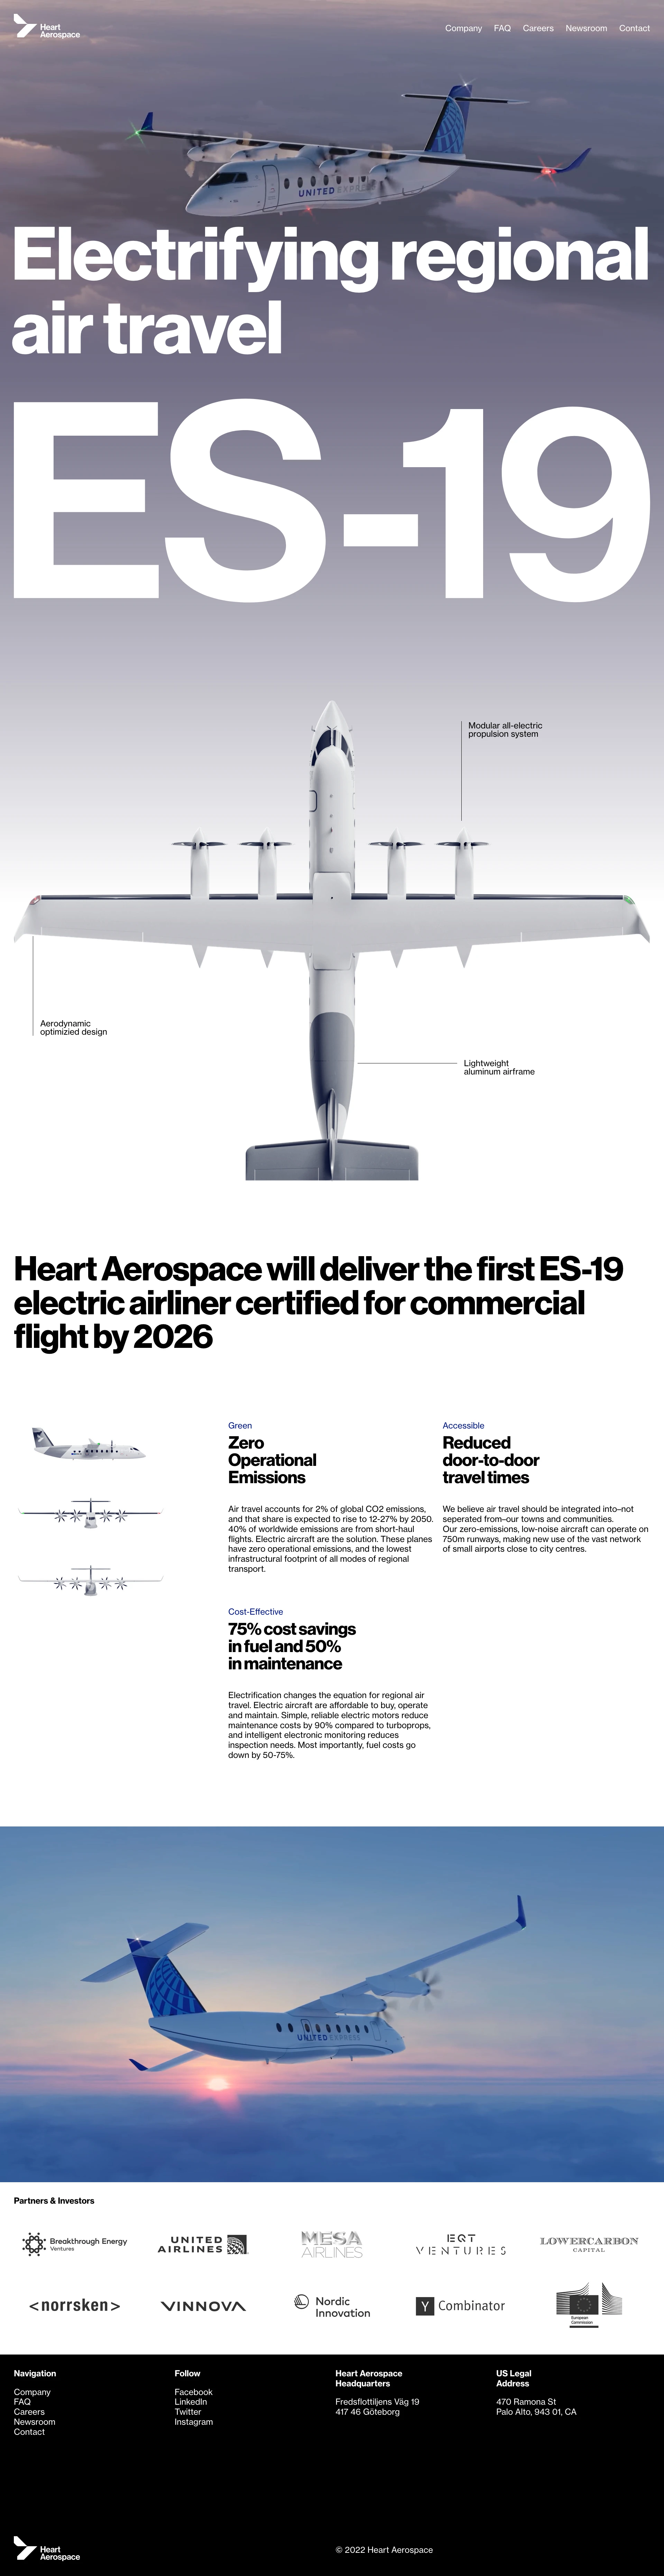 Heart Aerospace Landing Page Example: Heart Aerospace will deliver the first ES-19 electric airliner certified for commercial flight by 2026.